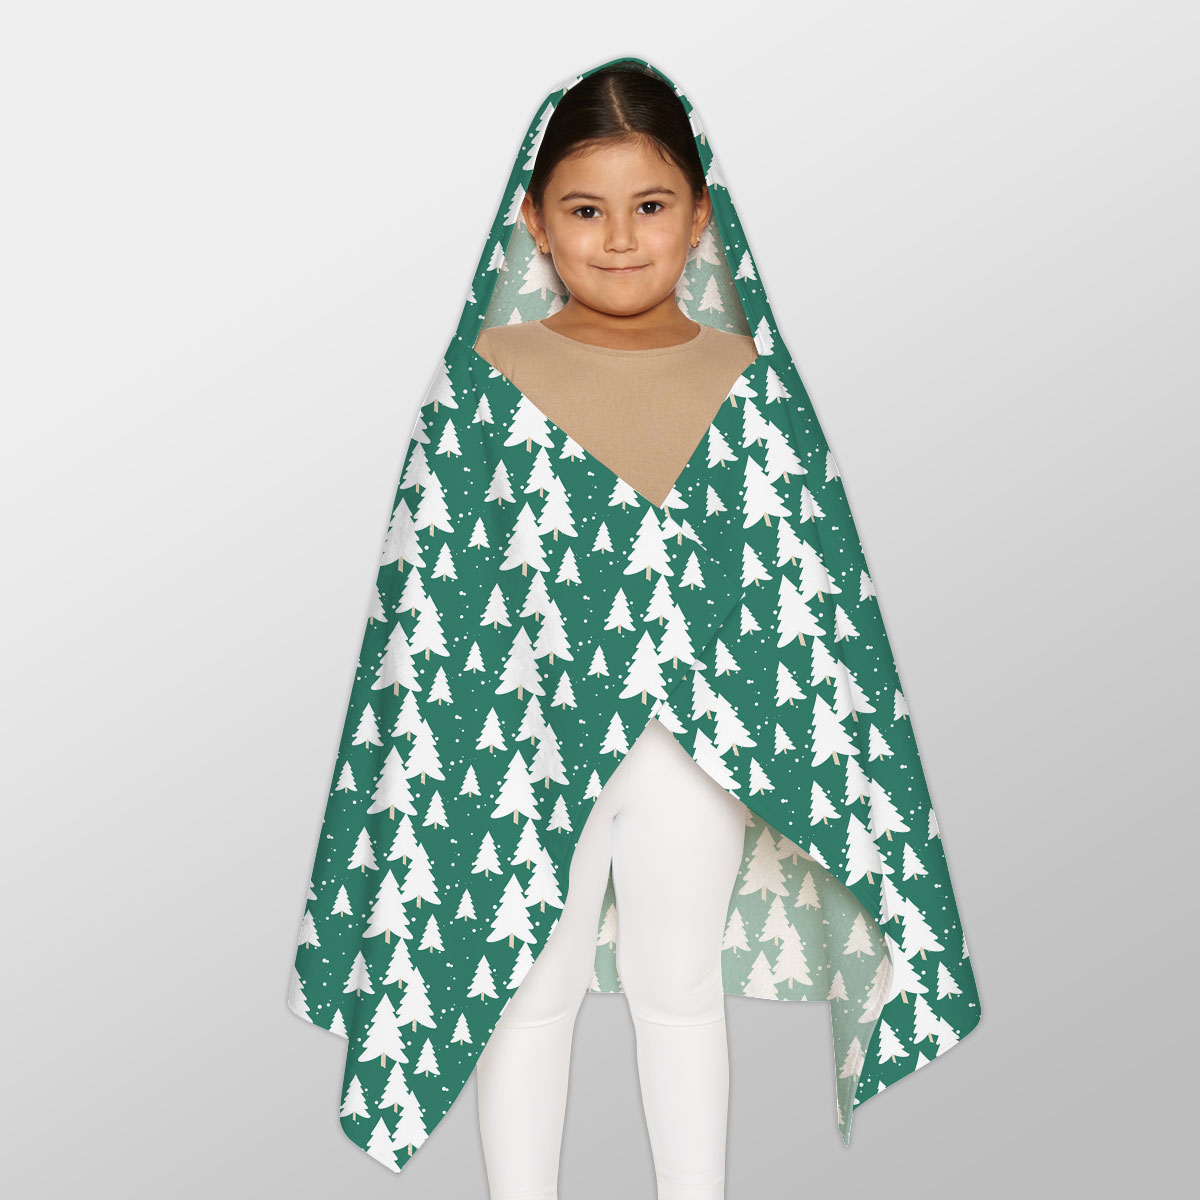 Green And White Christmas Tree Youth Hooded Towel